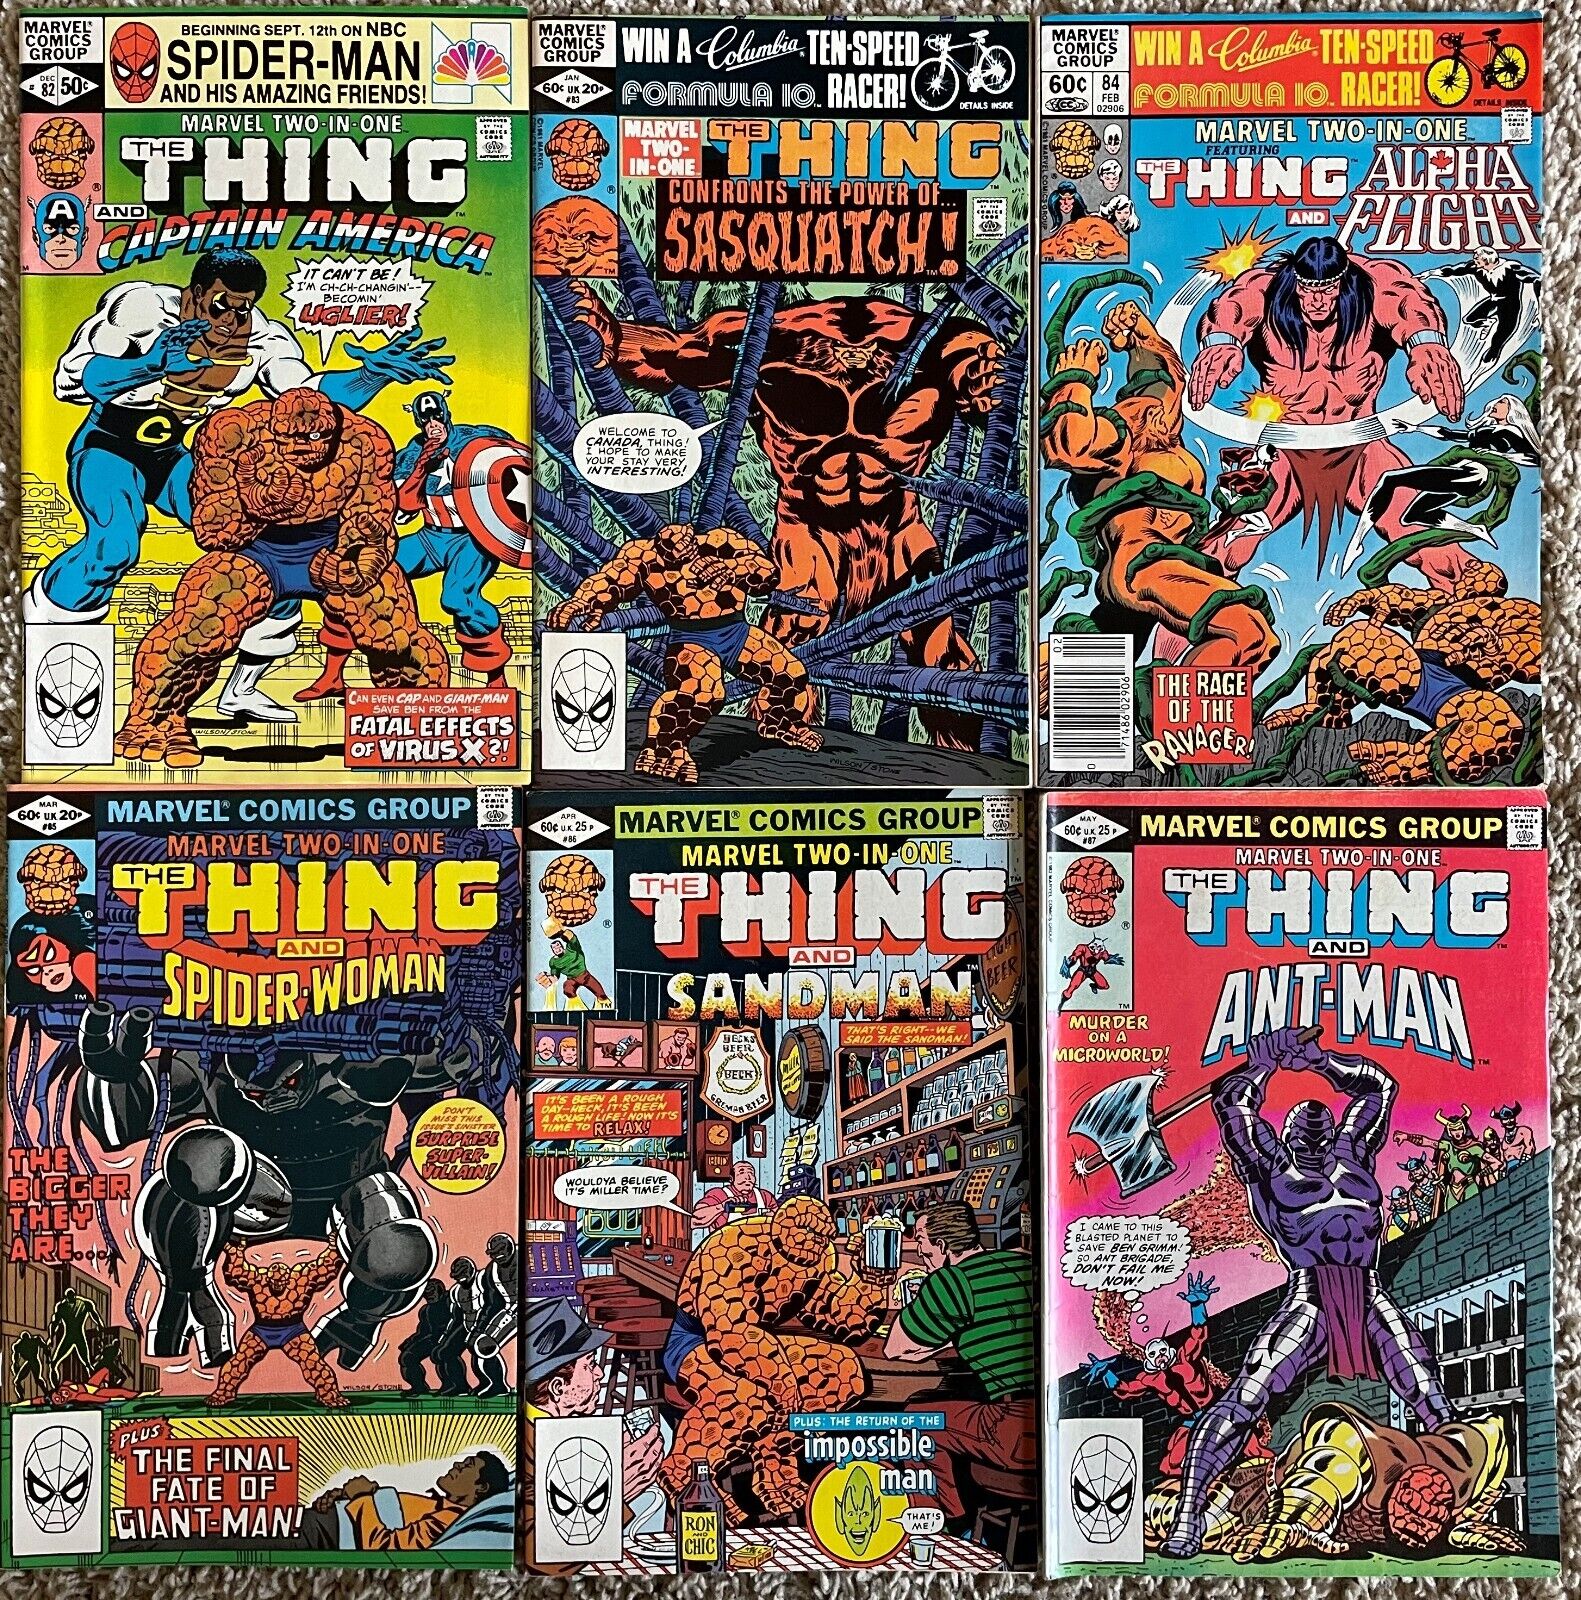 Marvel Two-In-One Lot #7 Marvel comics series from the 1970s